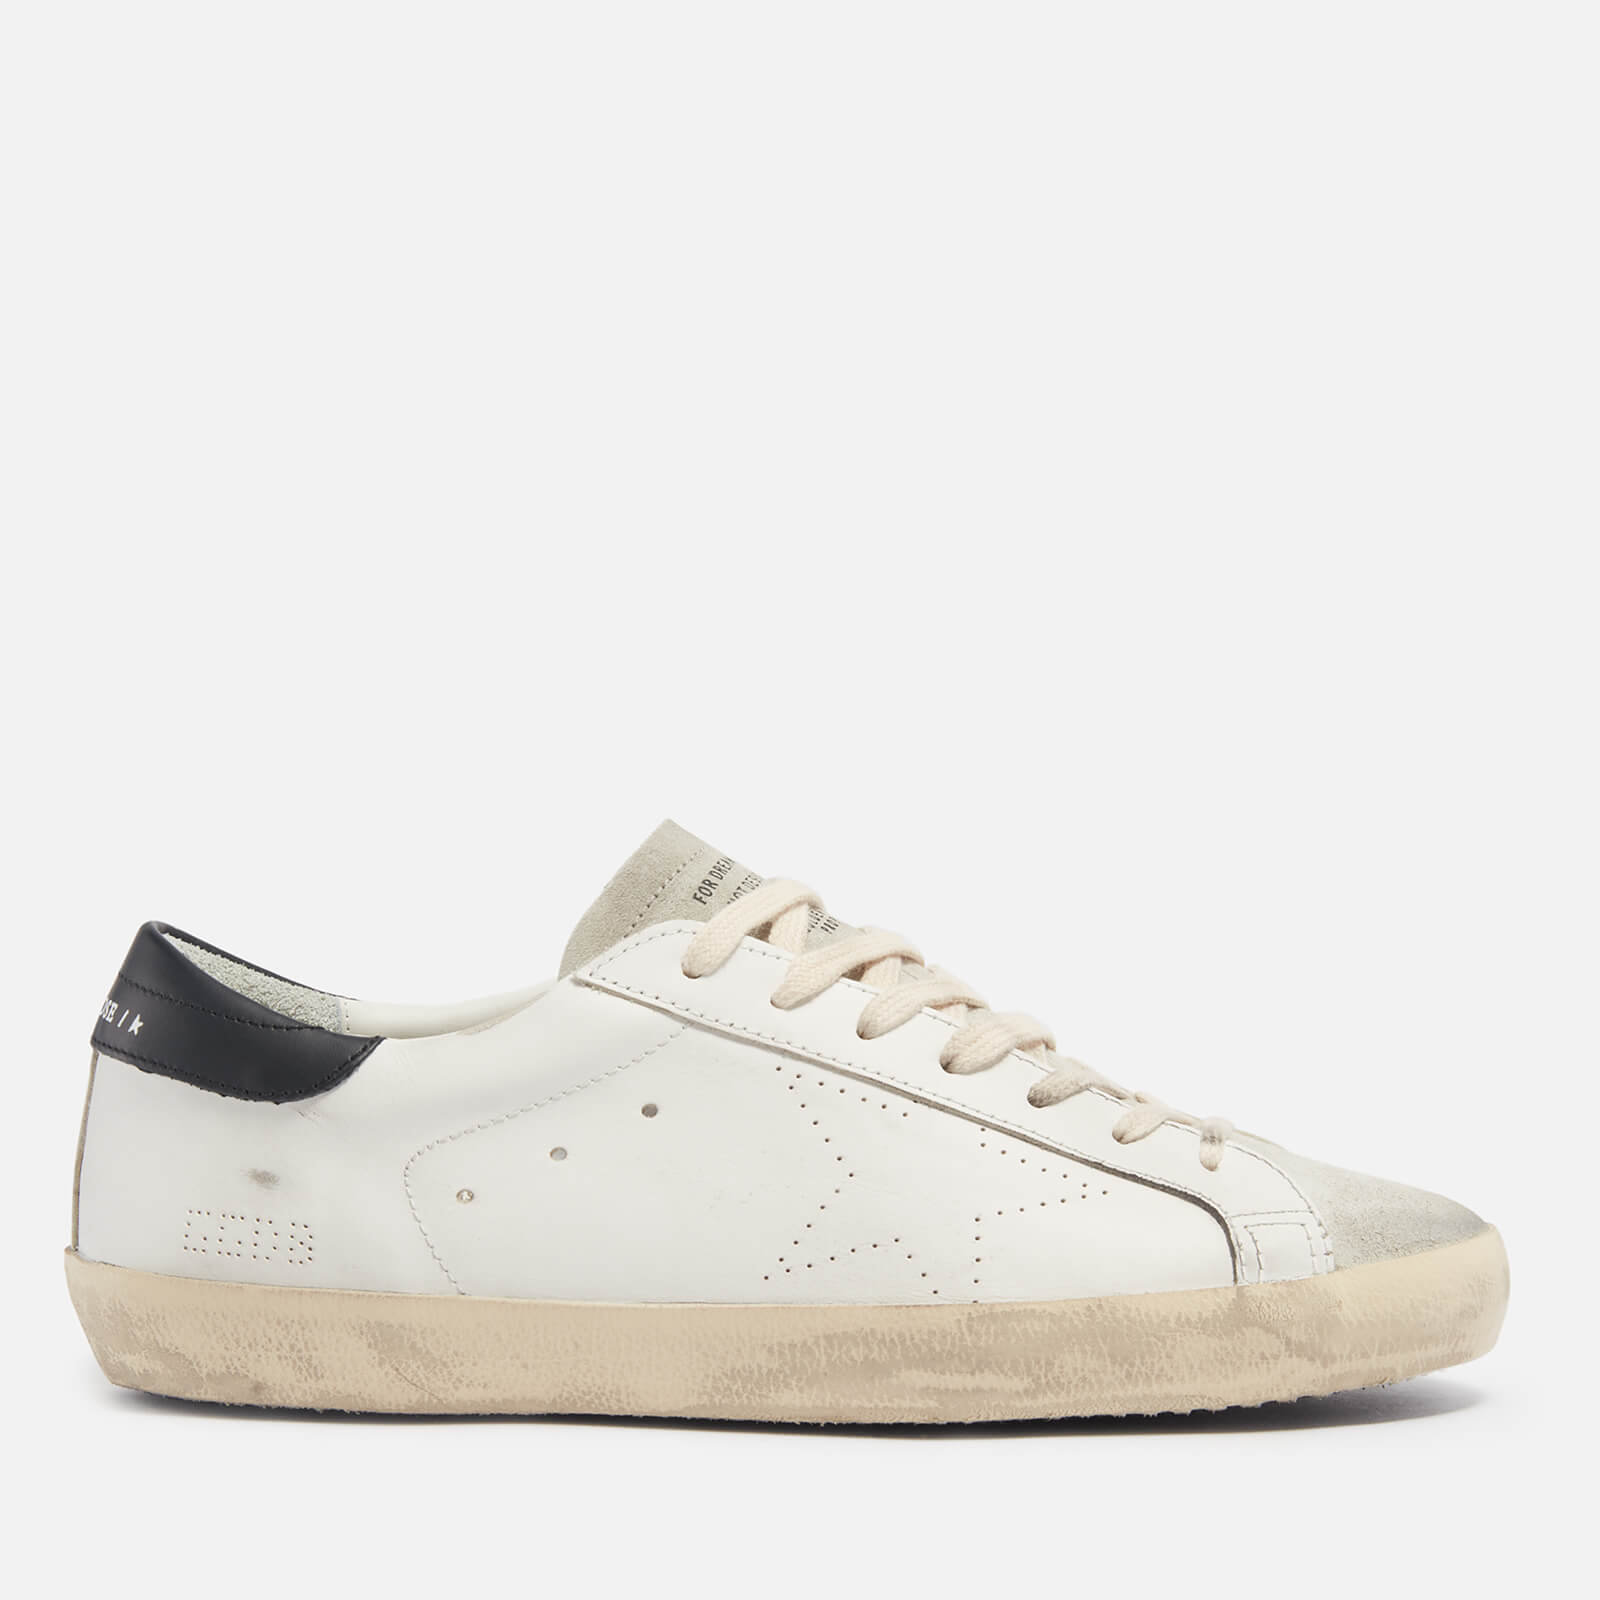 Golden Goose Men's Superstar Leather and Suede Trainers - UK 8